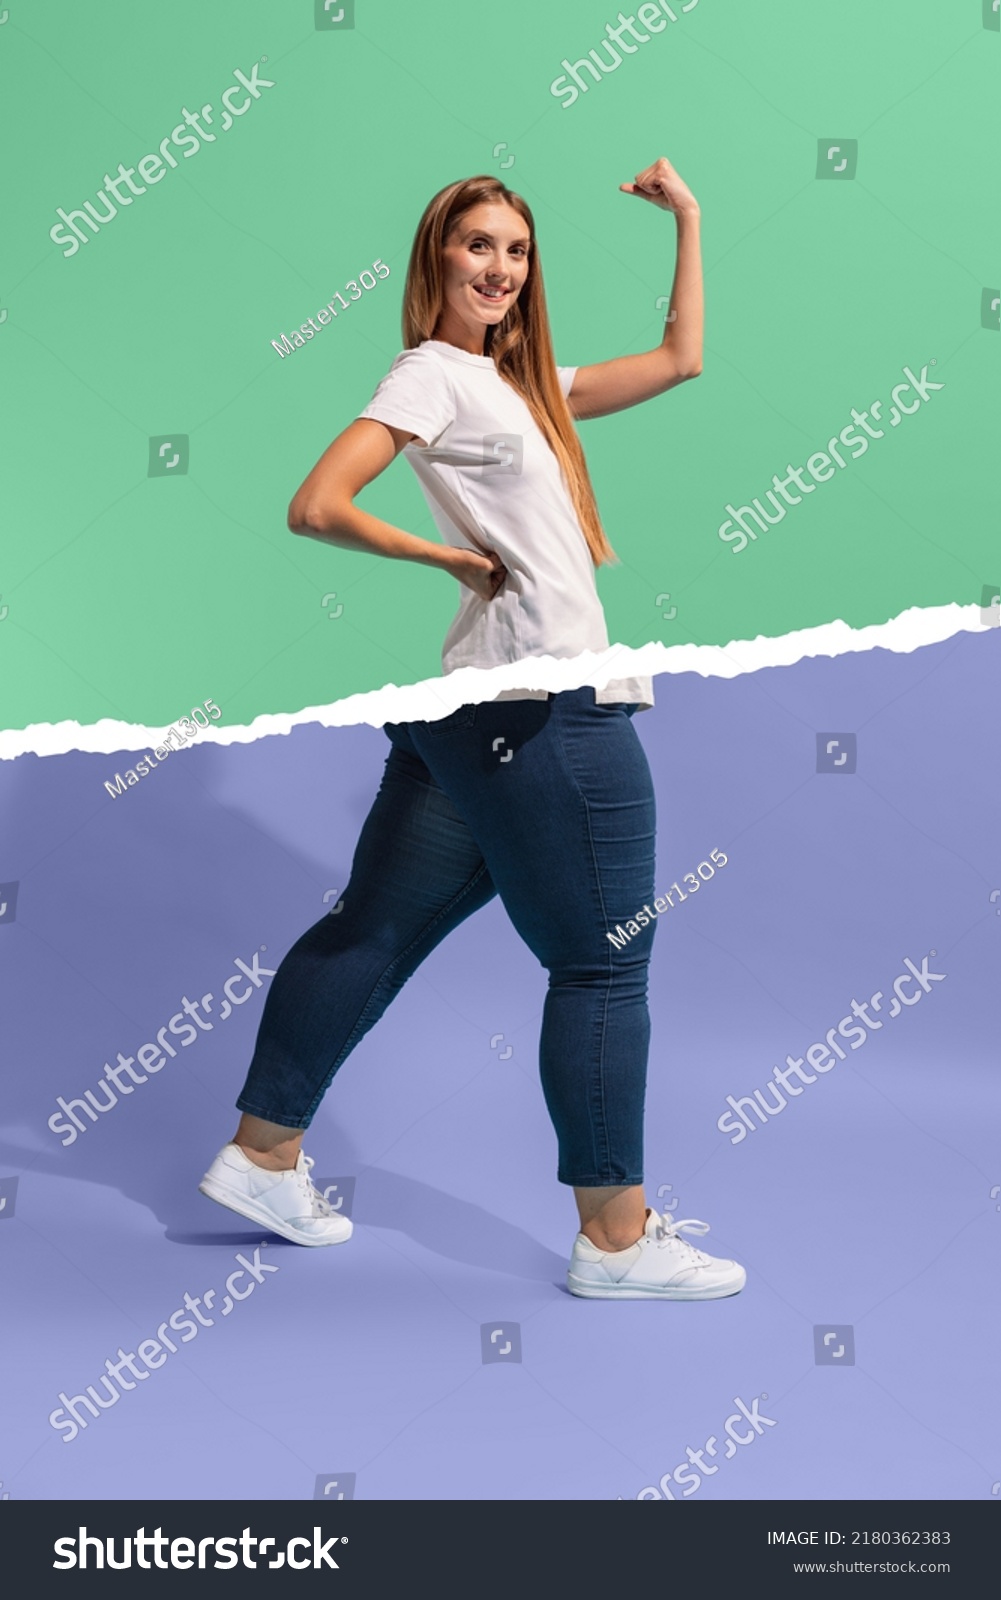 Comparison and contrast human shapes. Creative art collage with young slim girl and plus-size woman isolated on green-purple background. Weight loss, fitness, healthy eating, motivation concept. #2180362383